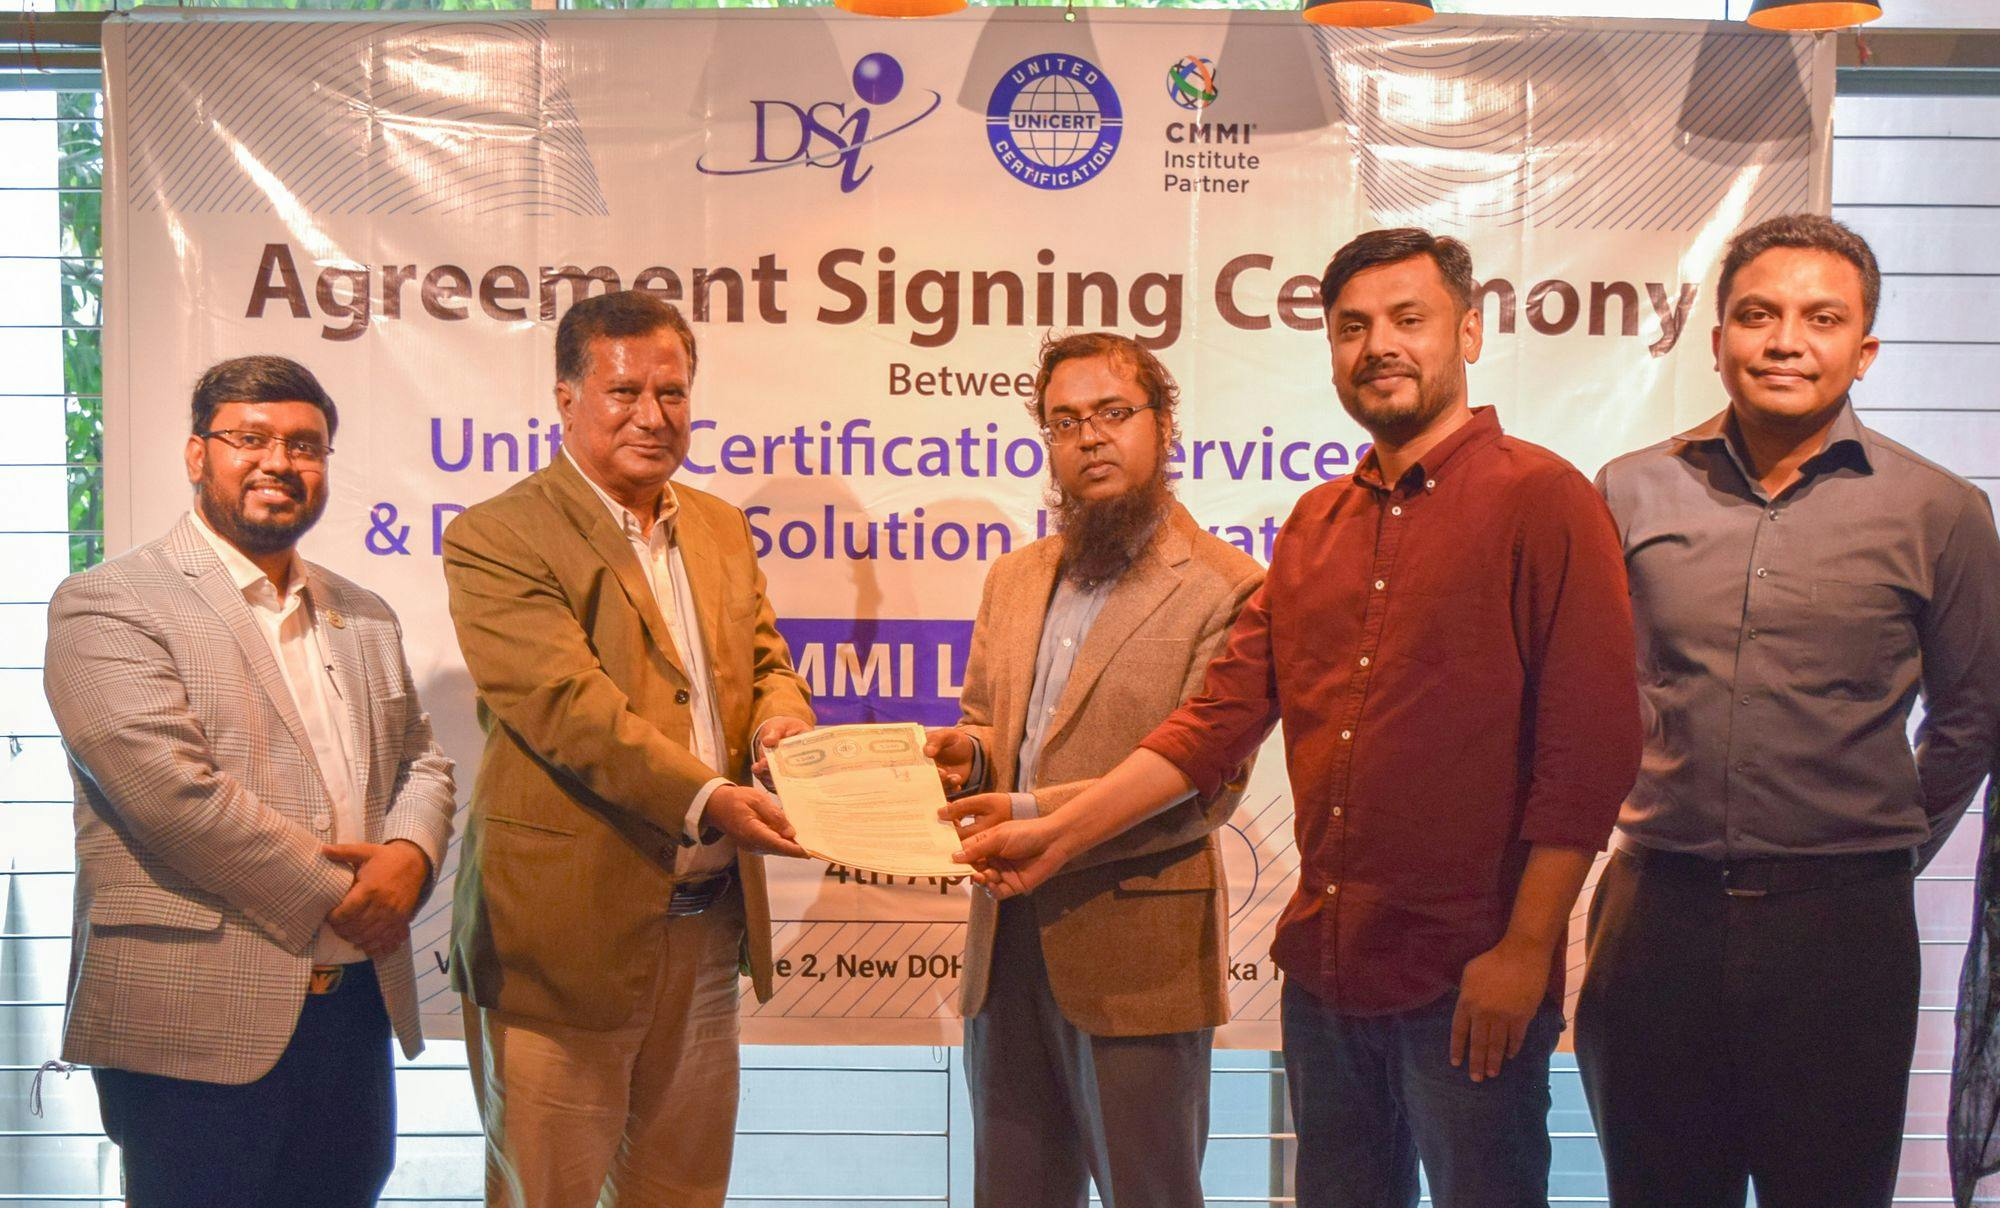 DSi signs contract with UNiCERT for CMMI appraisal